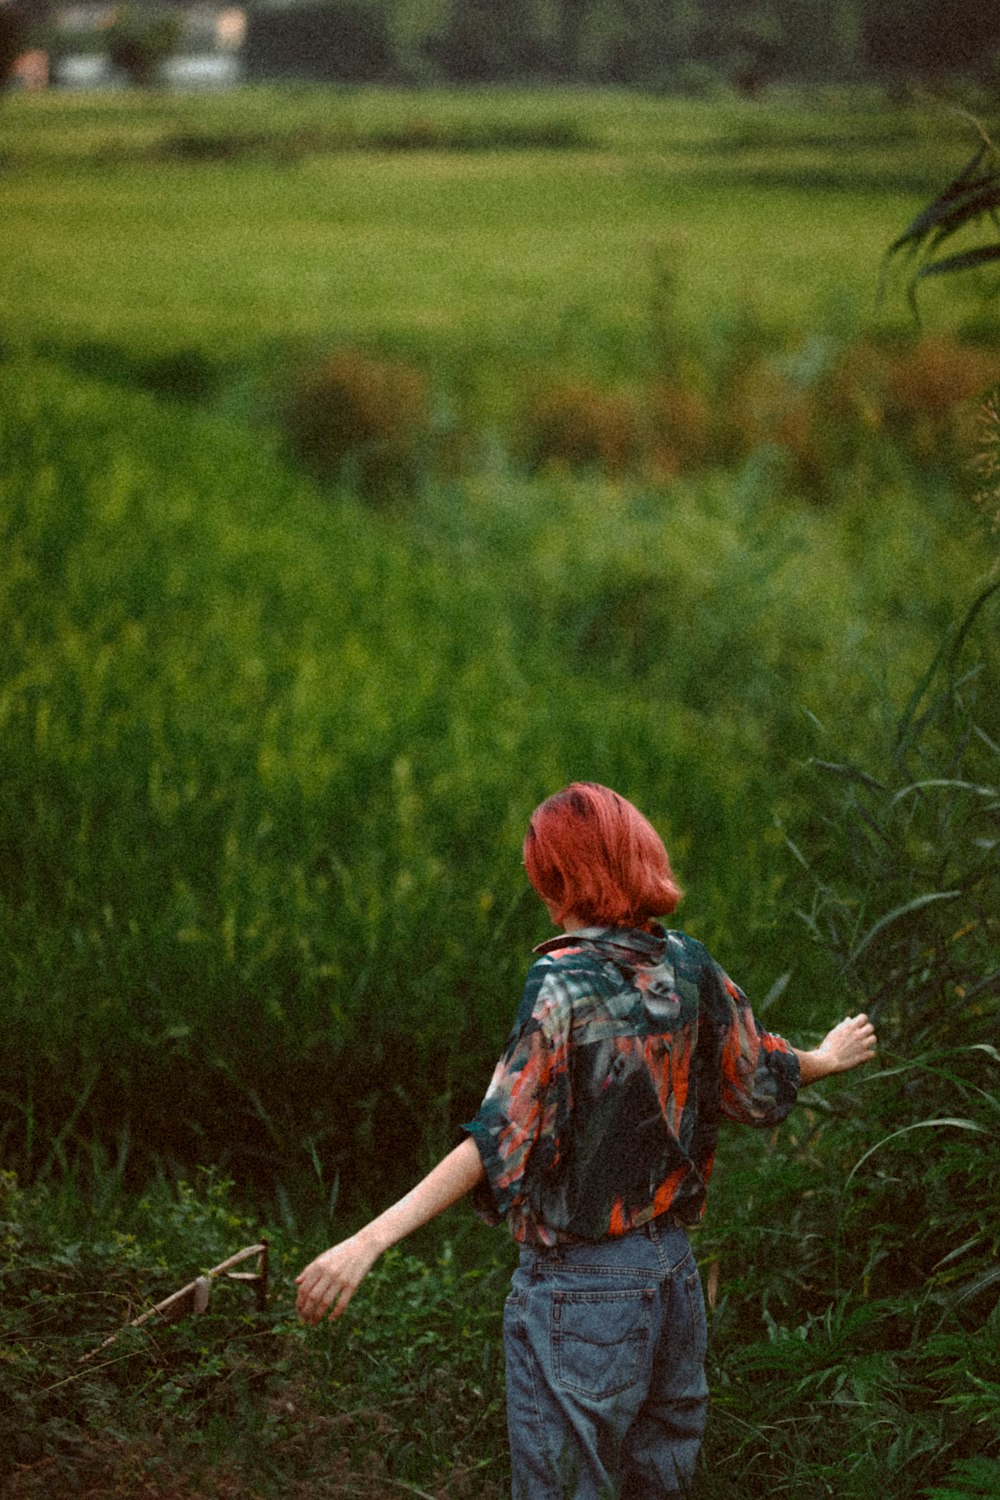 woman with red hair by a green field